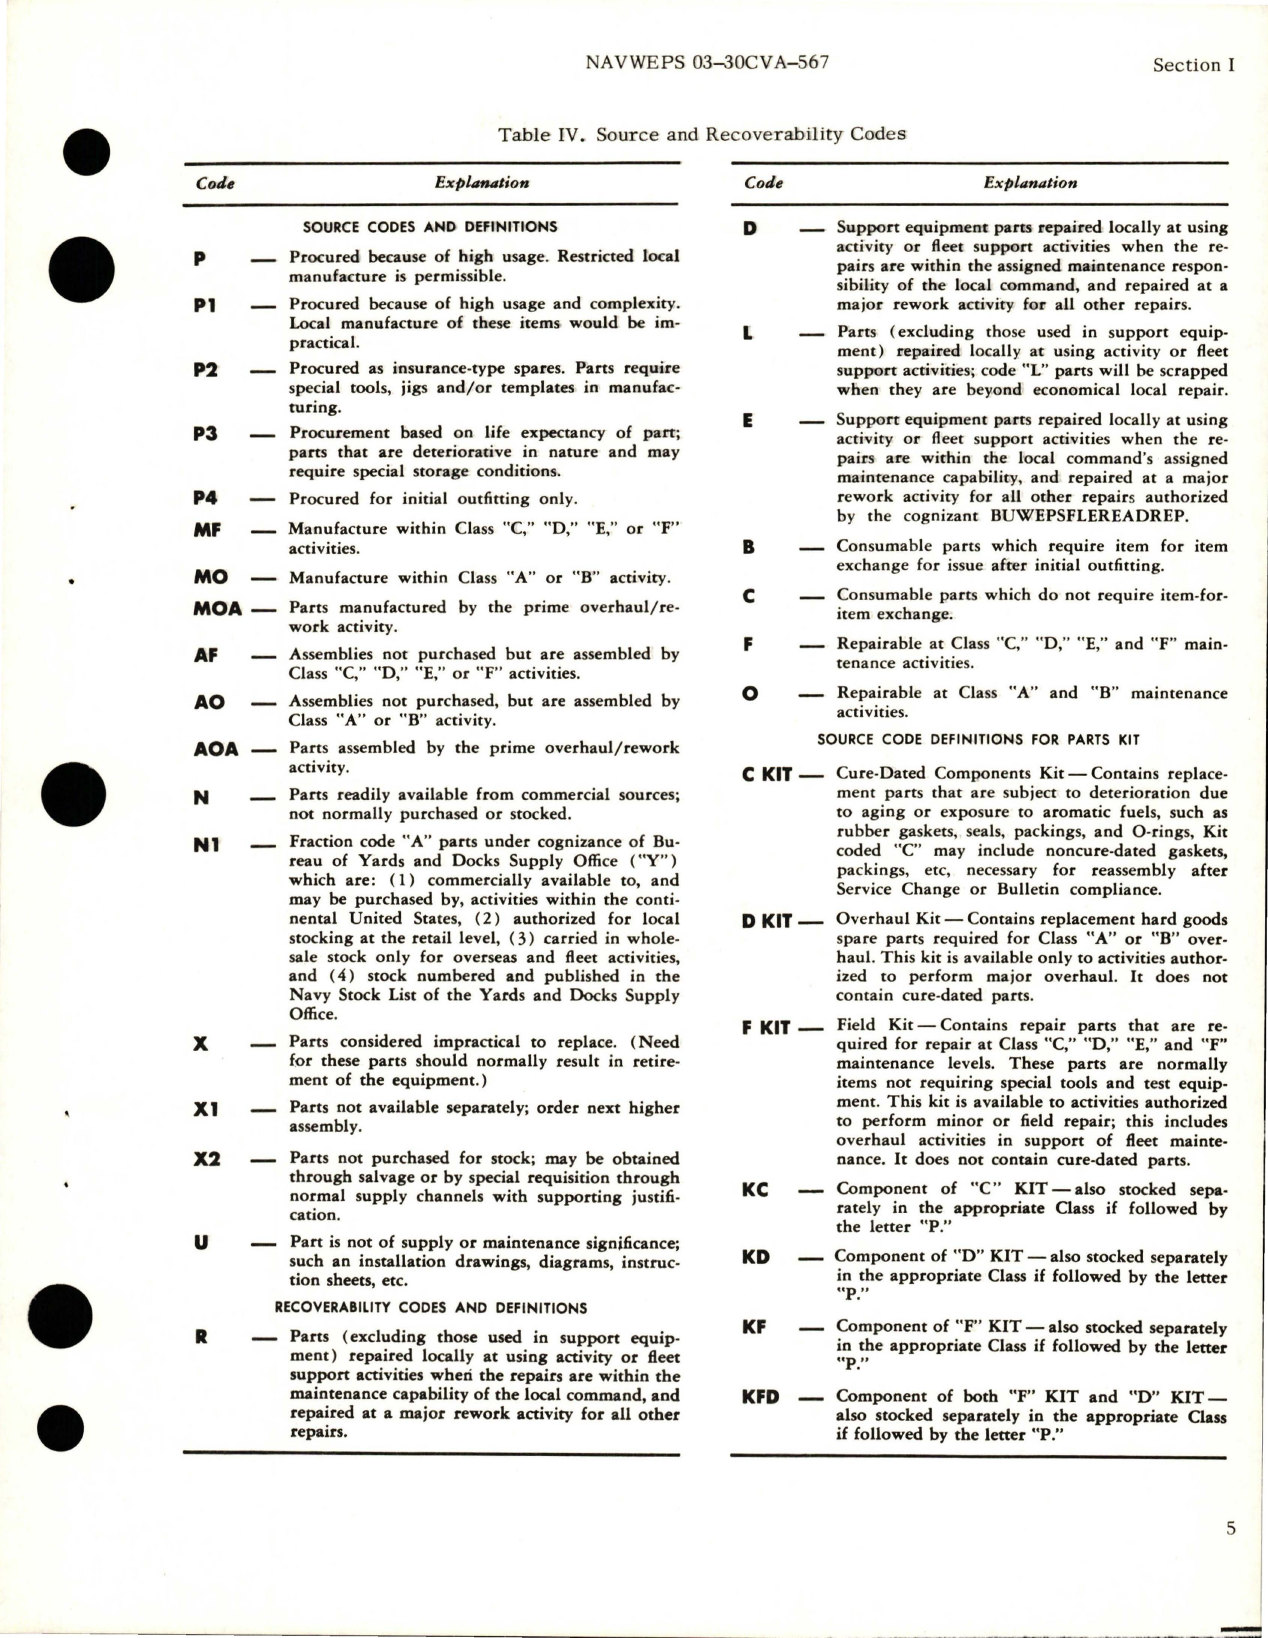 Sample page 7 from AirCorps Library document: Illustrated Parts Breakdown for Elevator (Horizontal Tail) Power Control Servo and Cylinder Assembly, Rigging and Synchronization Fixture